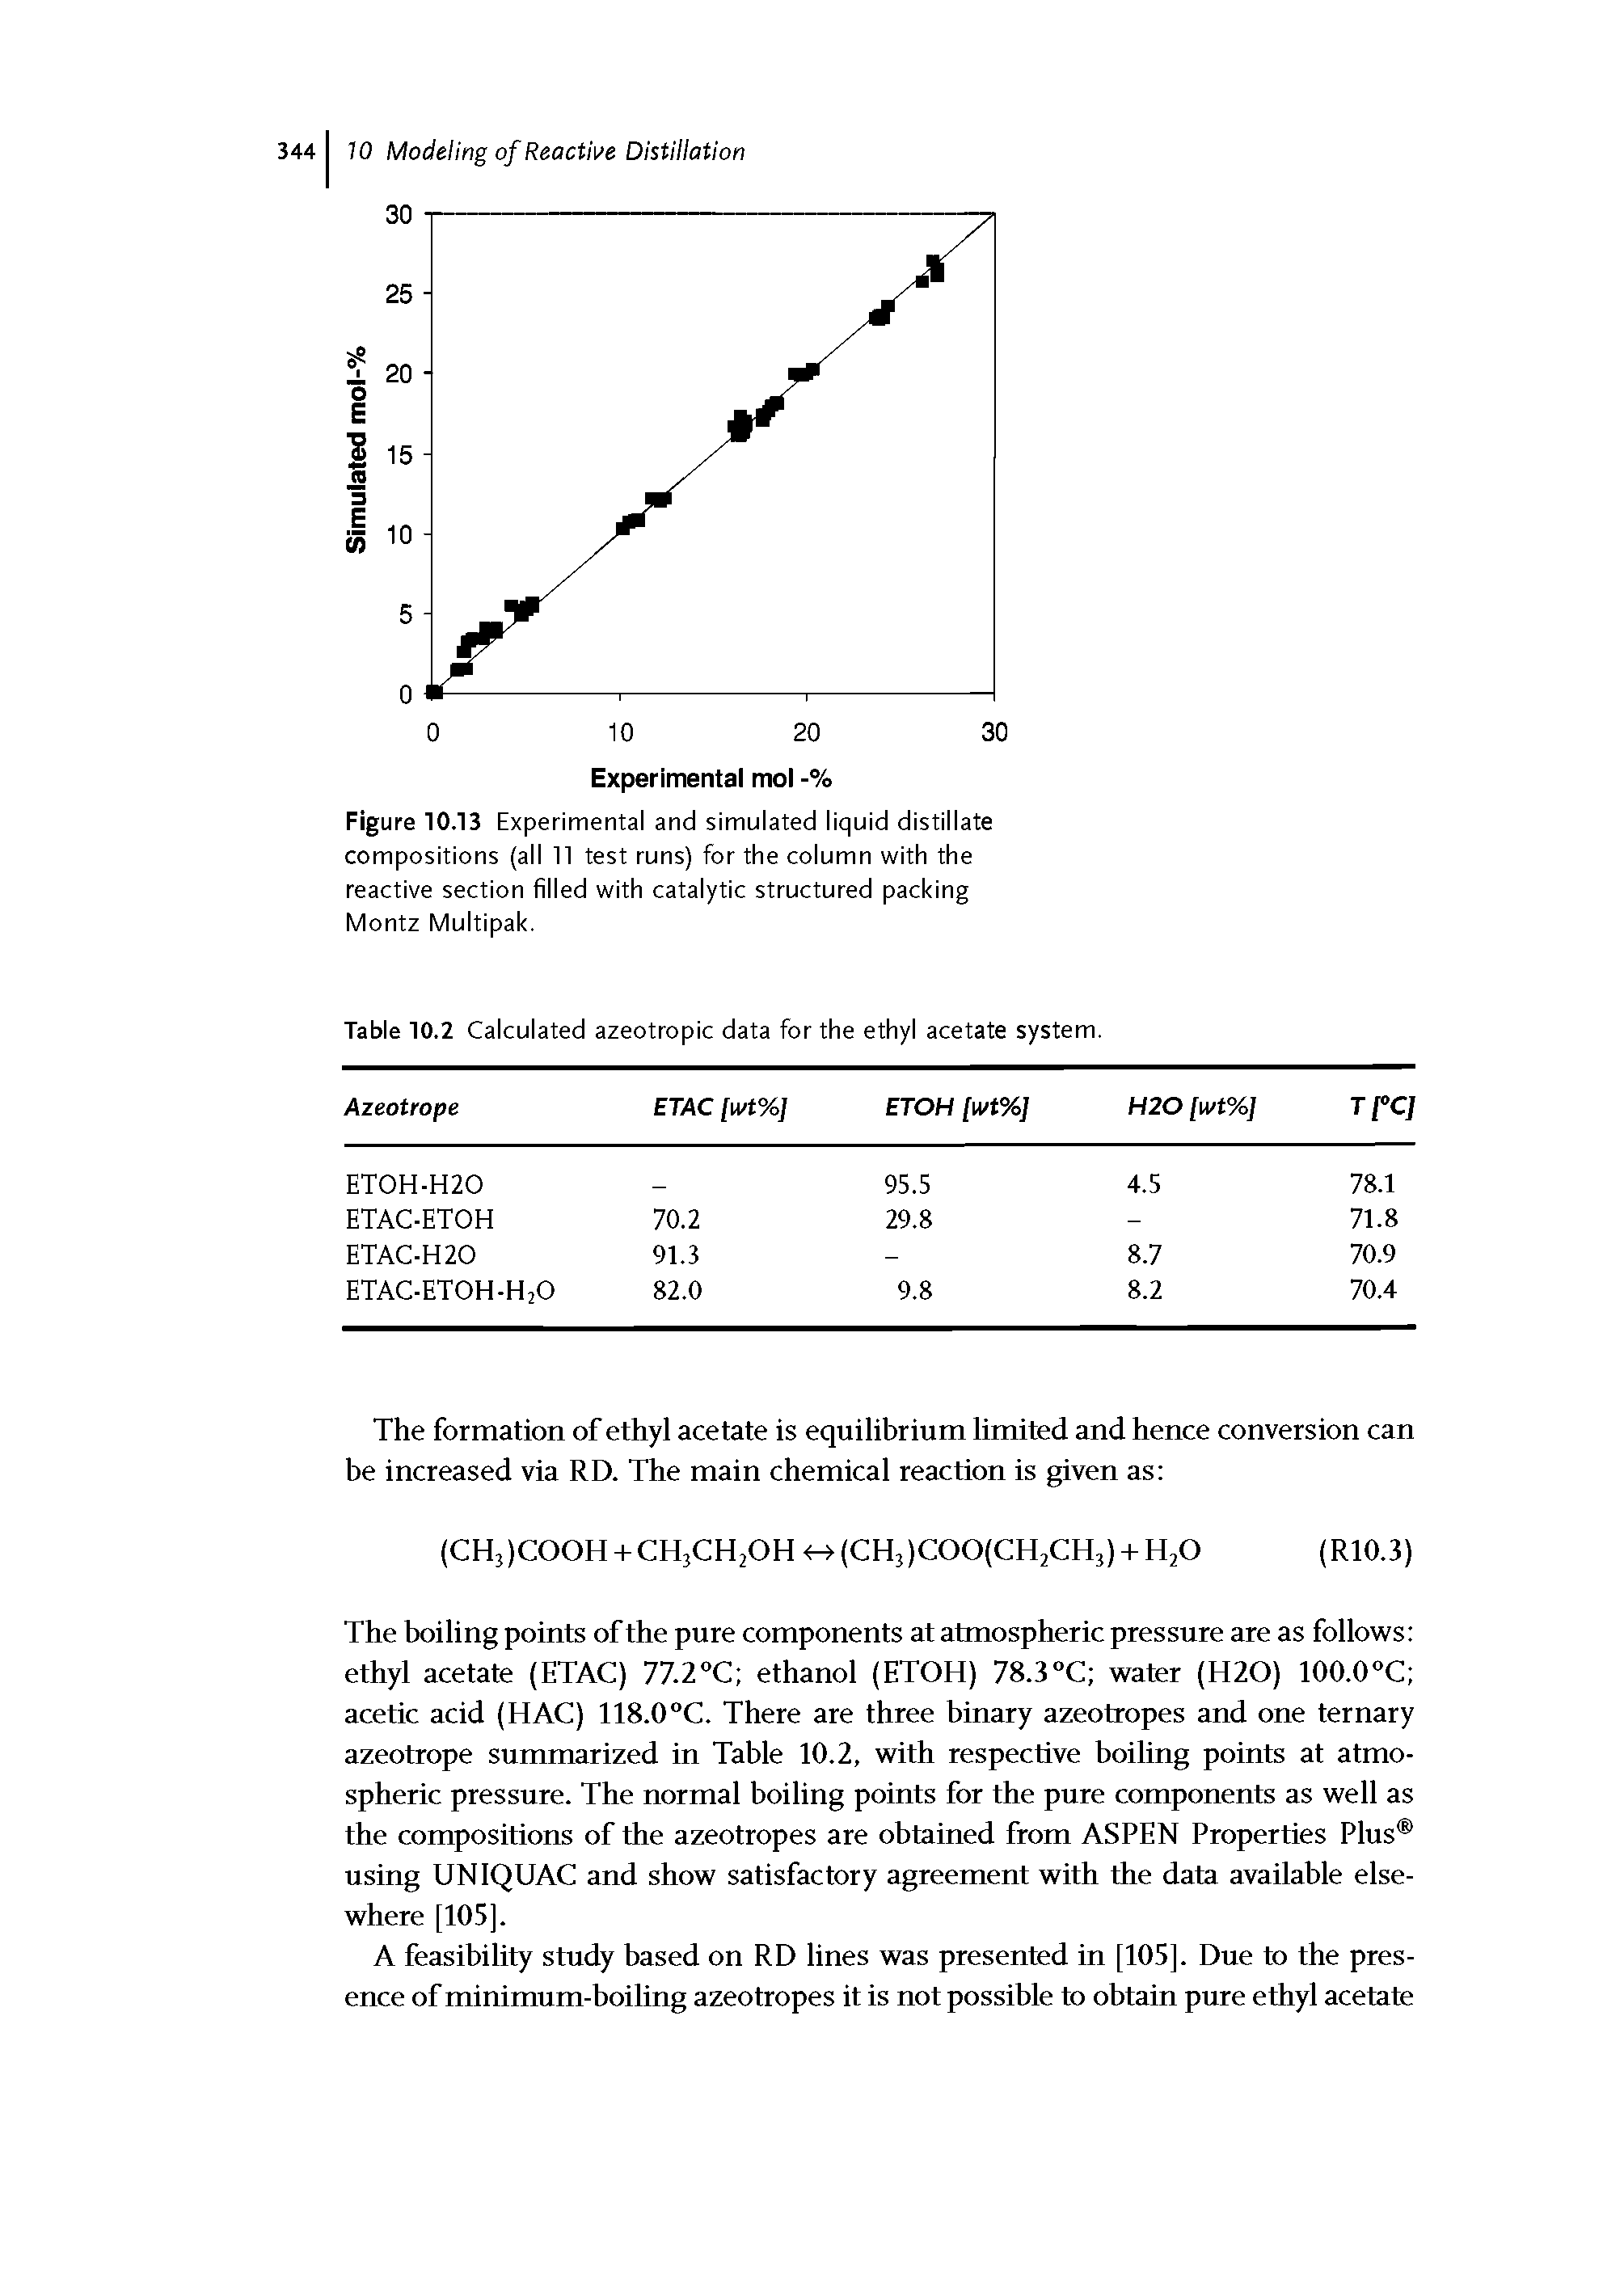 Figure 70.13 Experimental and simulated liquid distillate compositions (all 11 test runs) for the column with the reactive section filled with catalytic structured packing Montz Multipak.